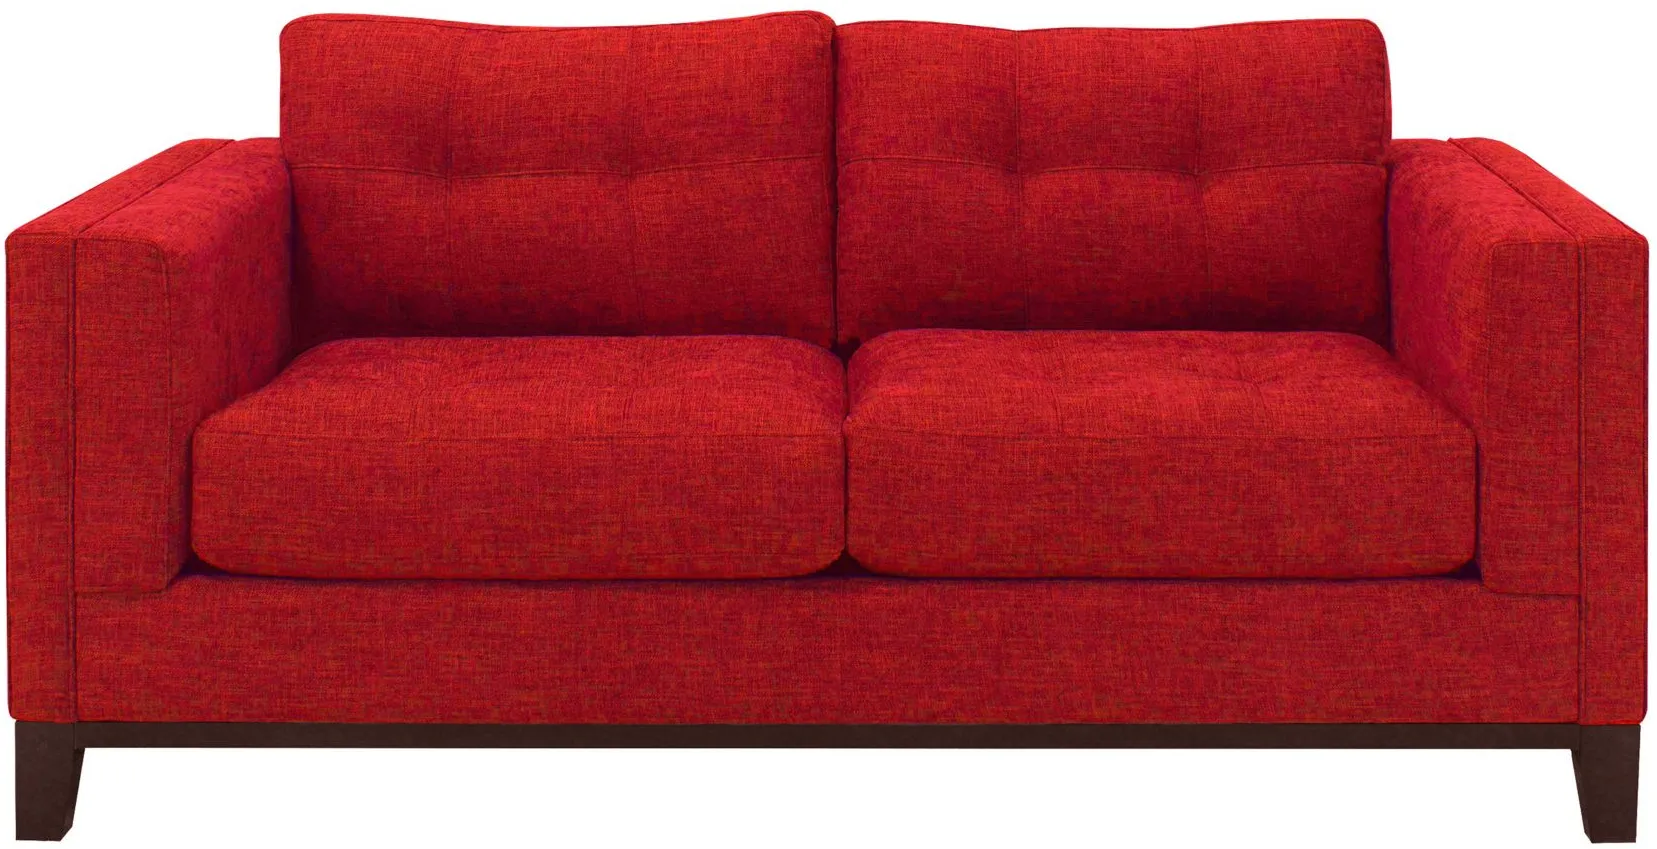 Mirasol Loveseat in Suede so Soft Cardinal by H.M. Richards